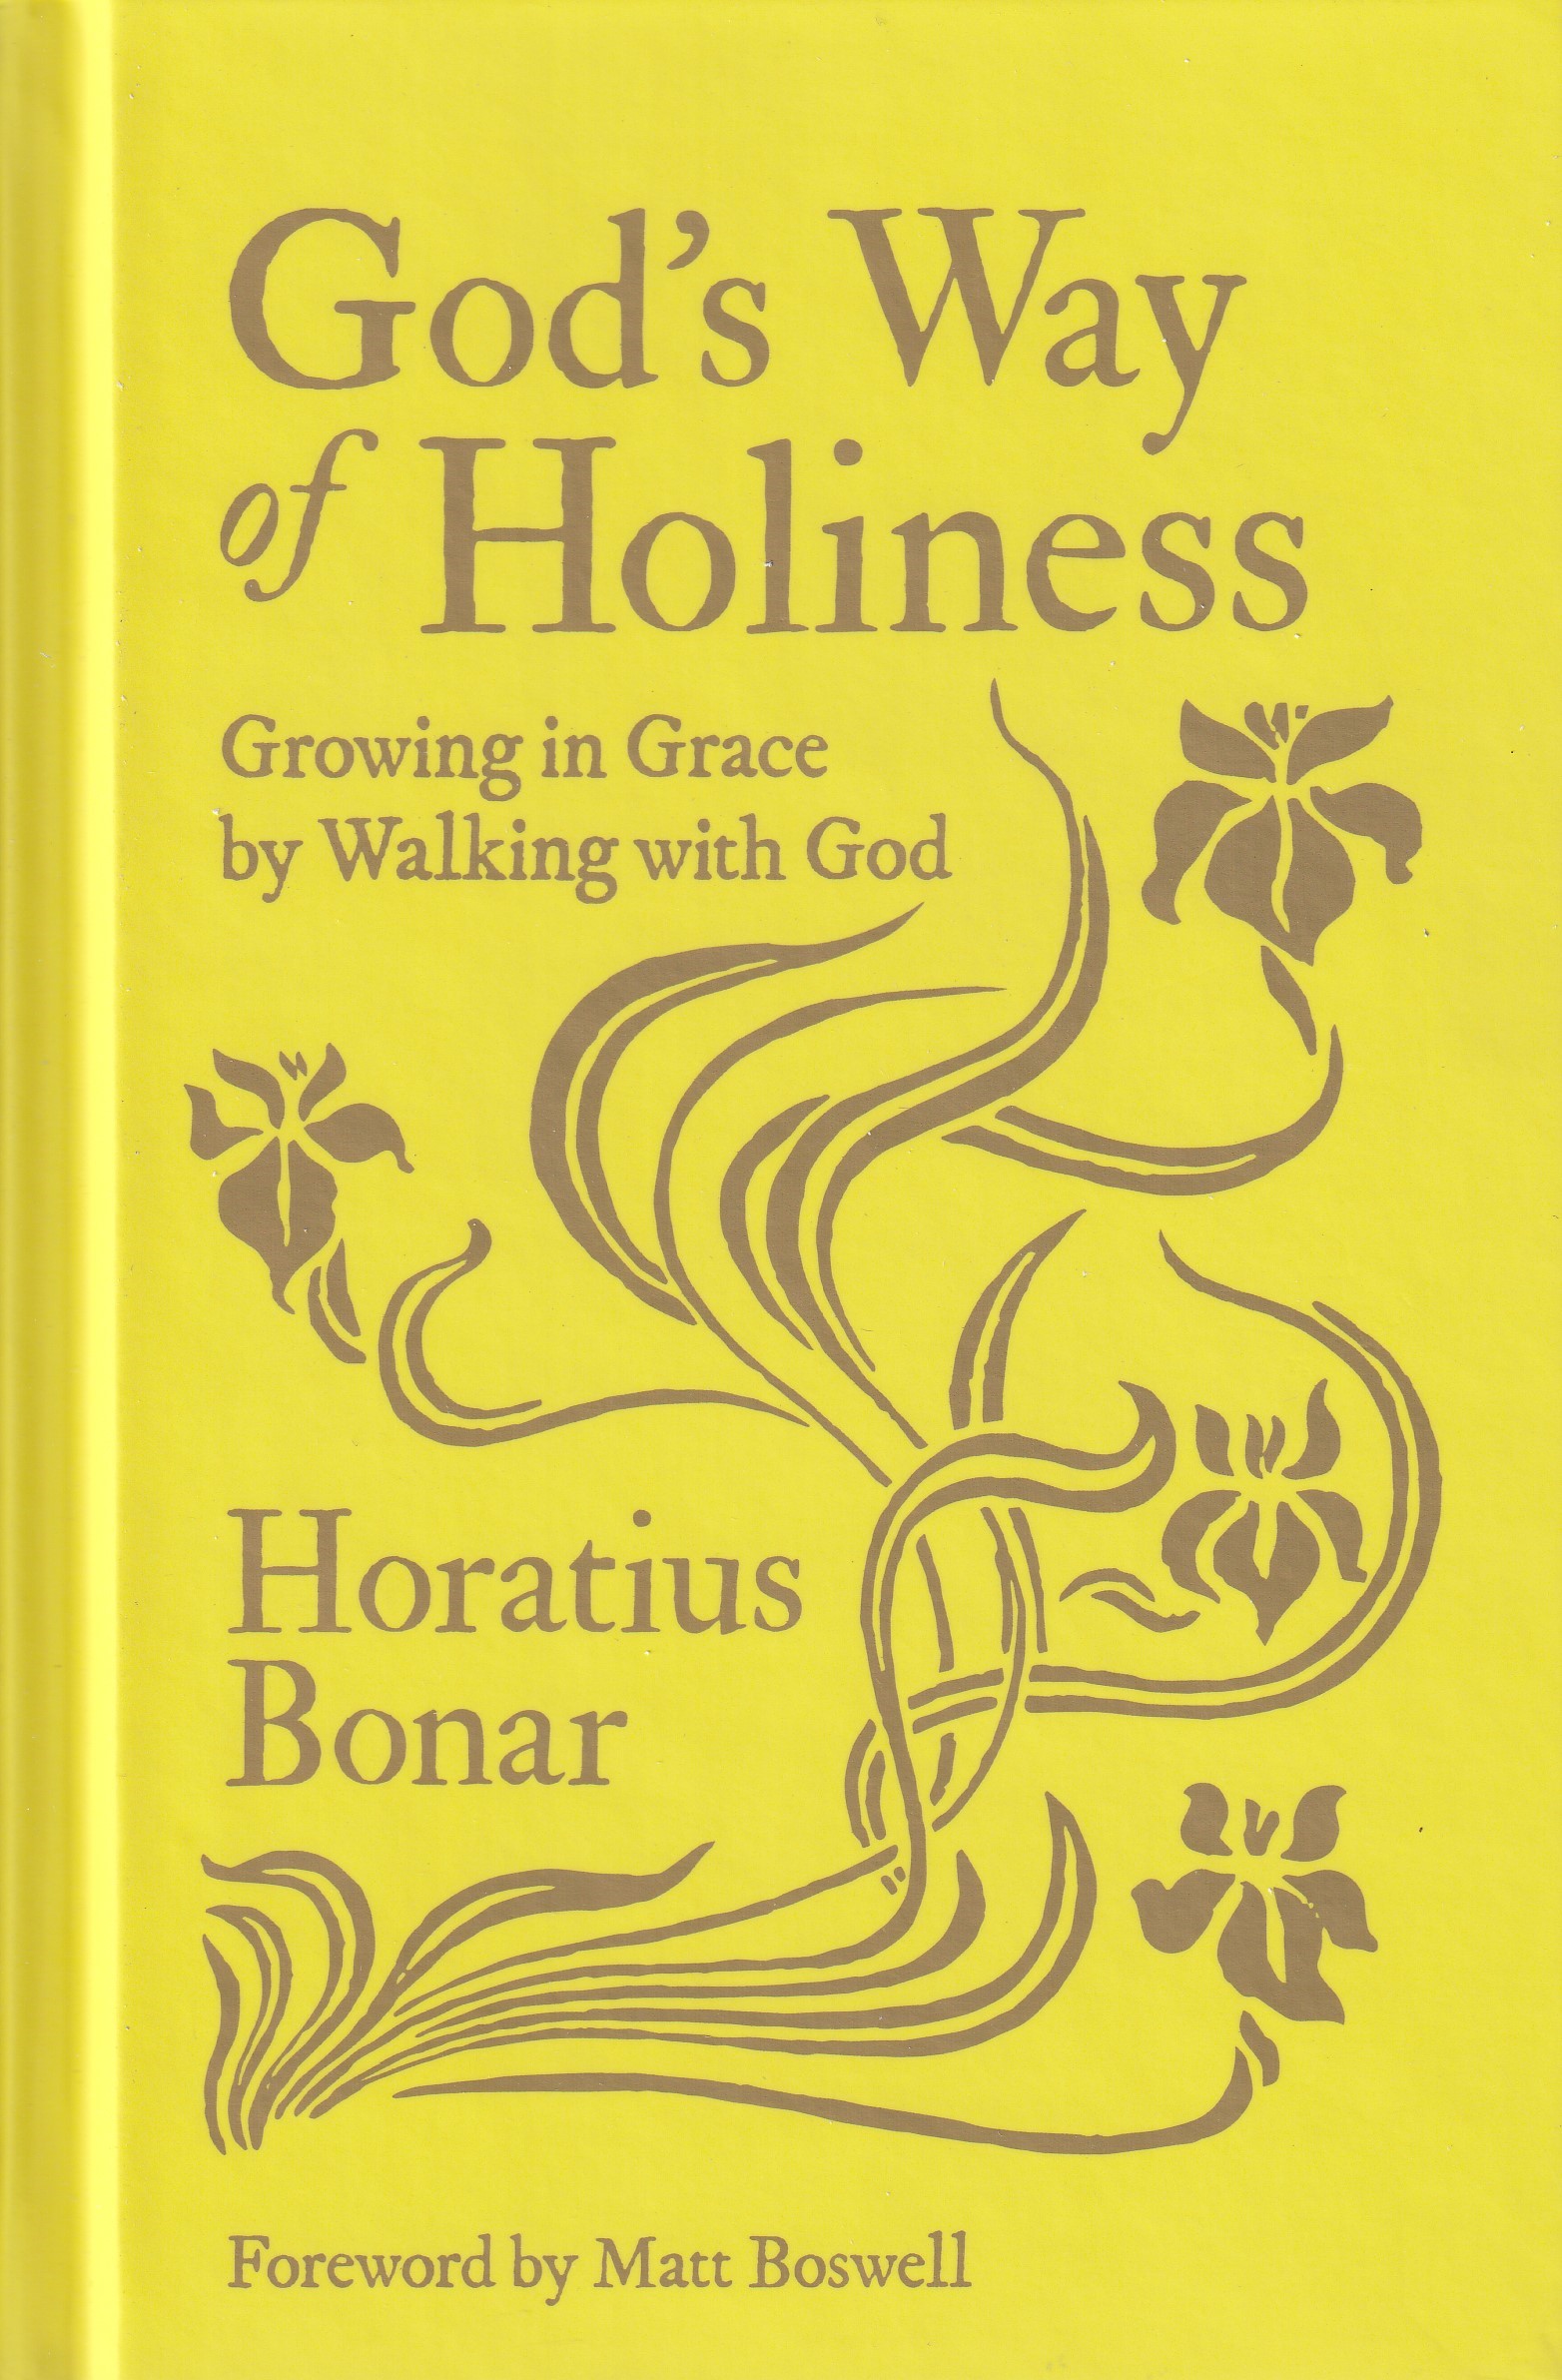 God's Way of Holiness